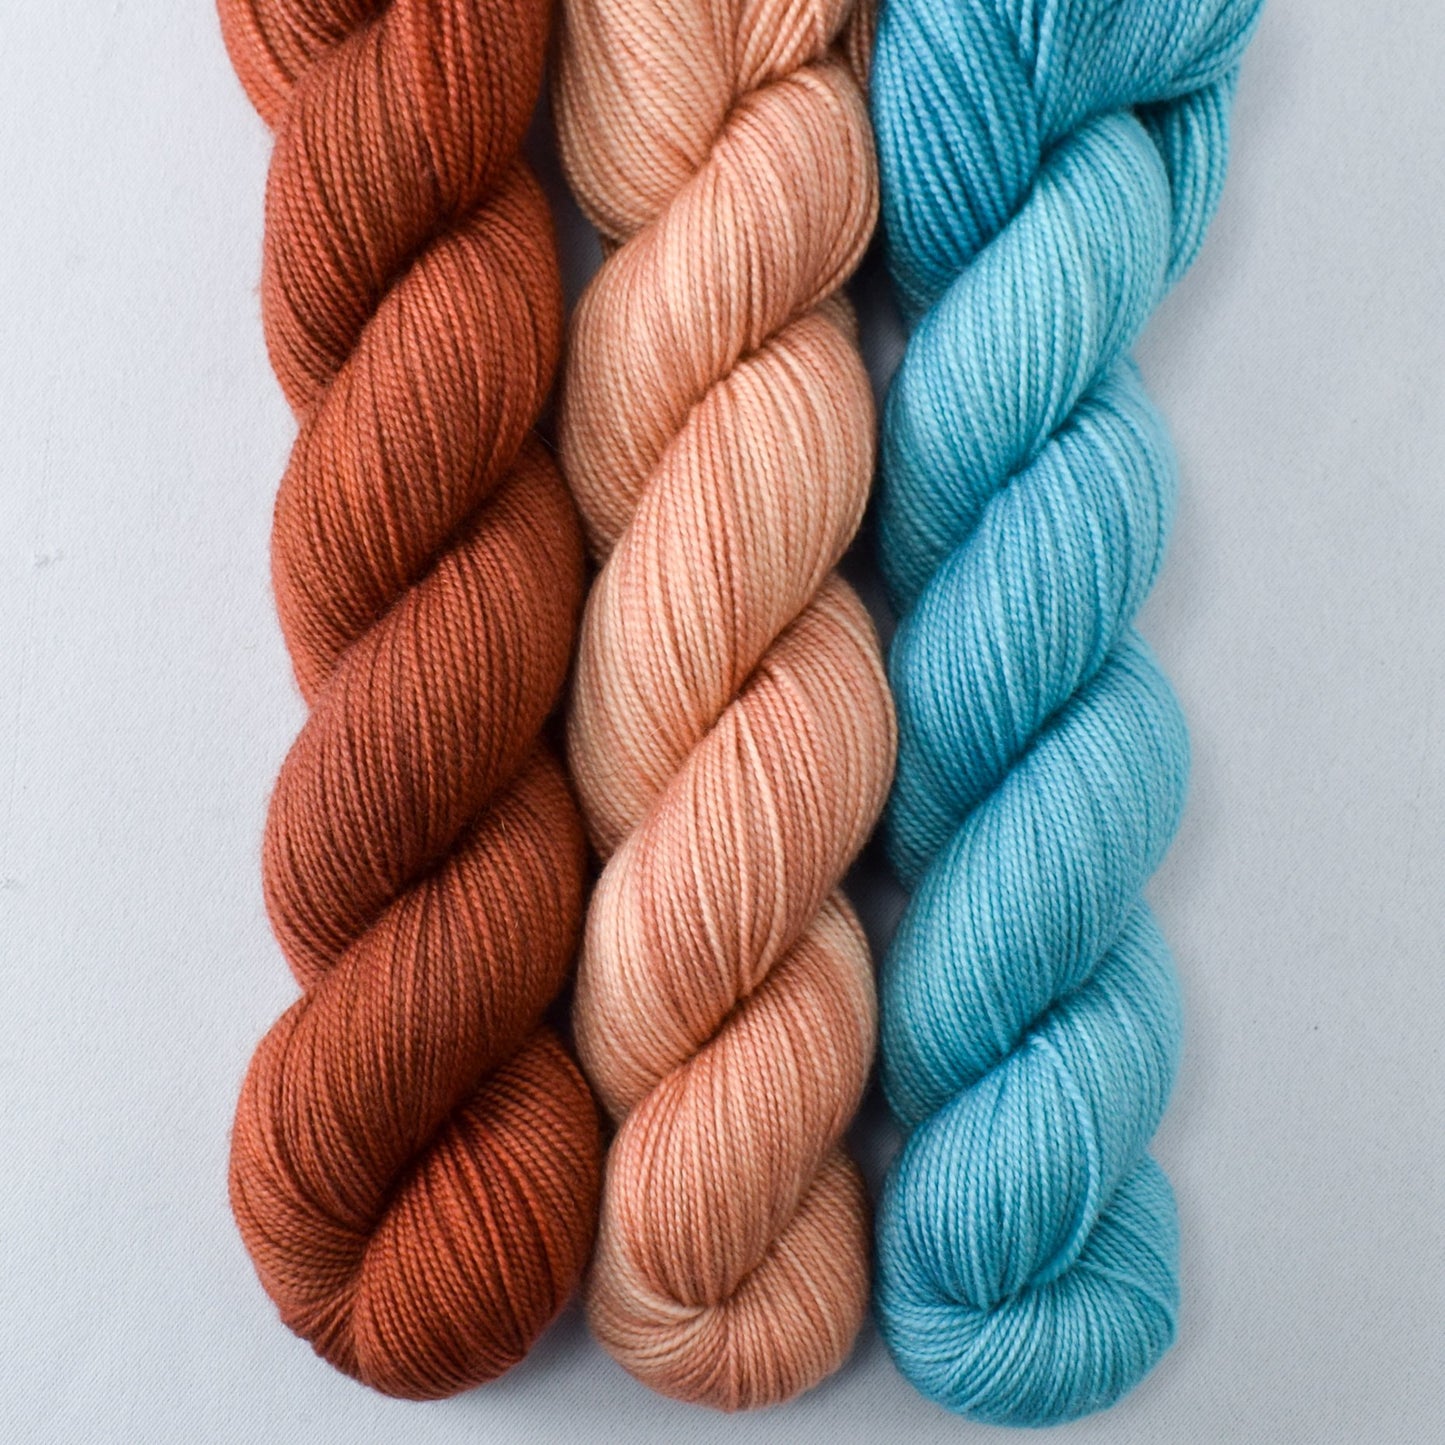 Flummery, Paprkia, Relaxation - Miss Babs Yummy 2-Ply Trio